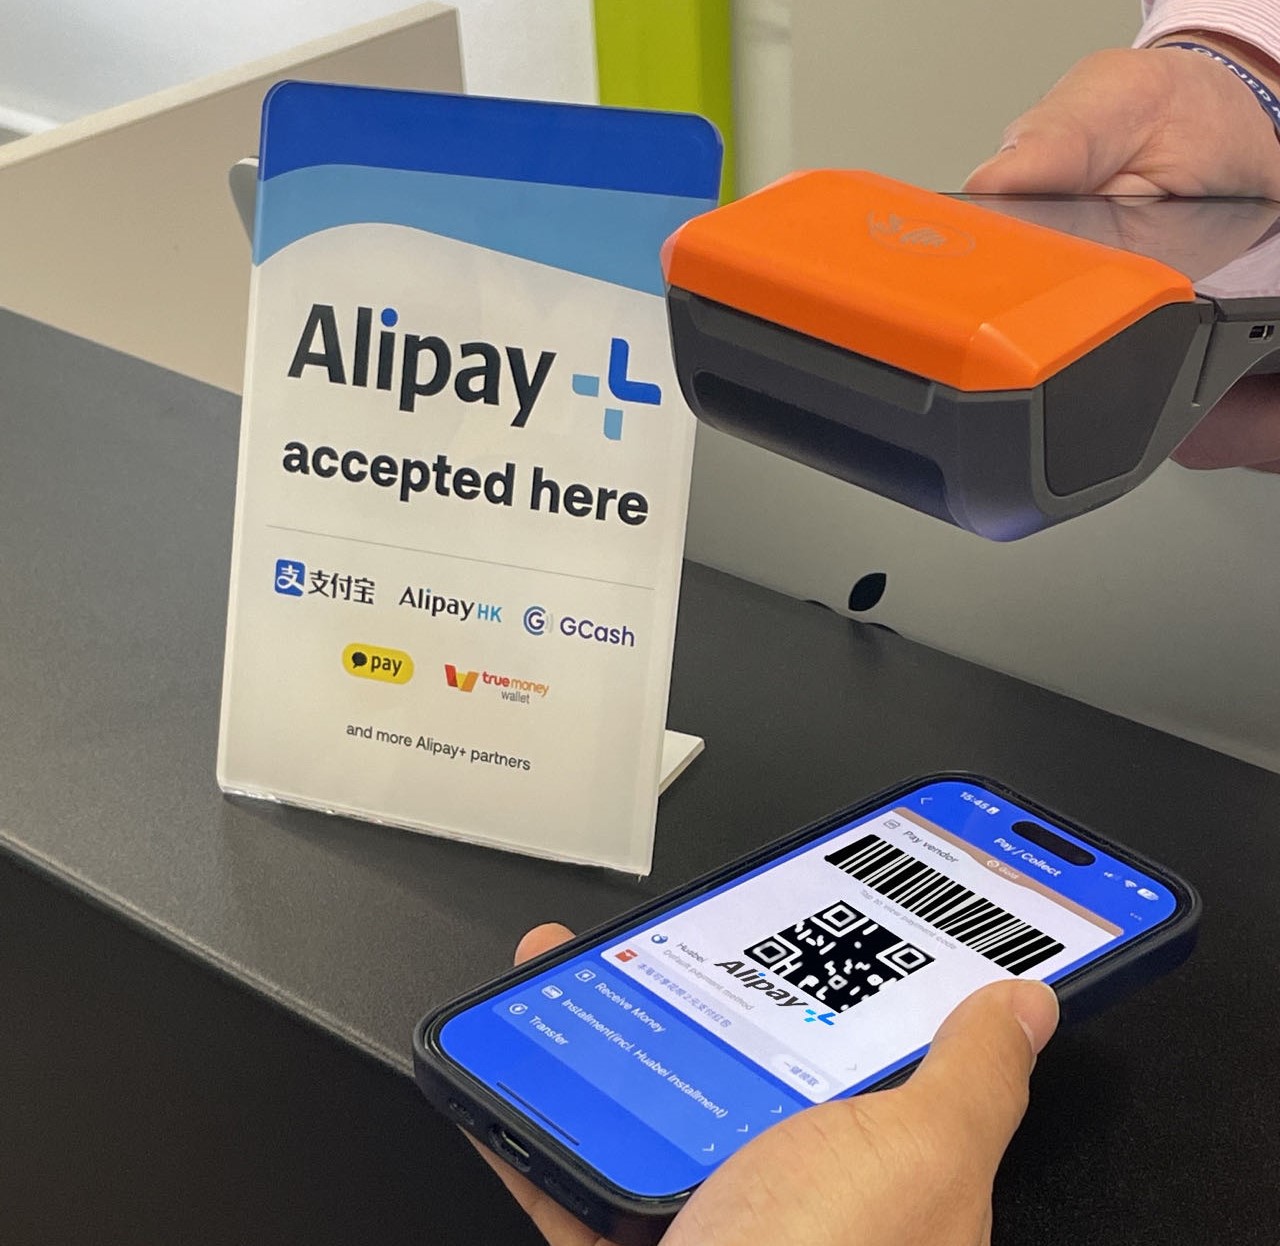 Alipay + in-store payment